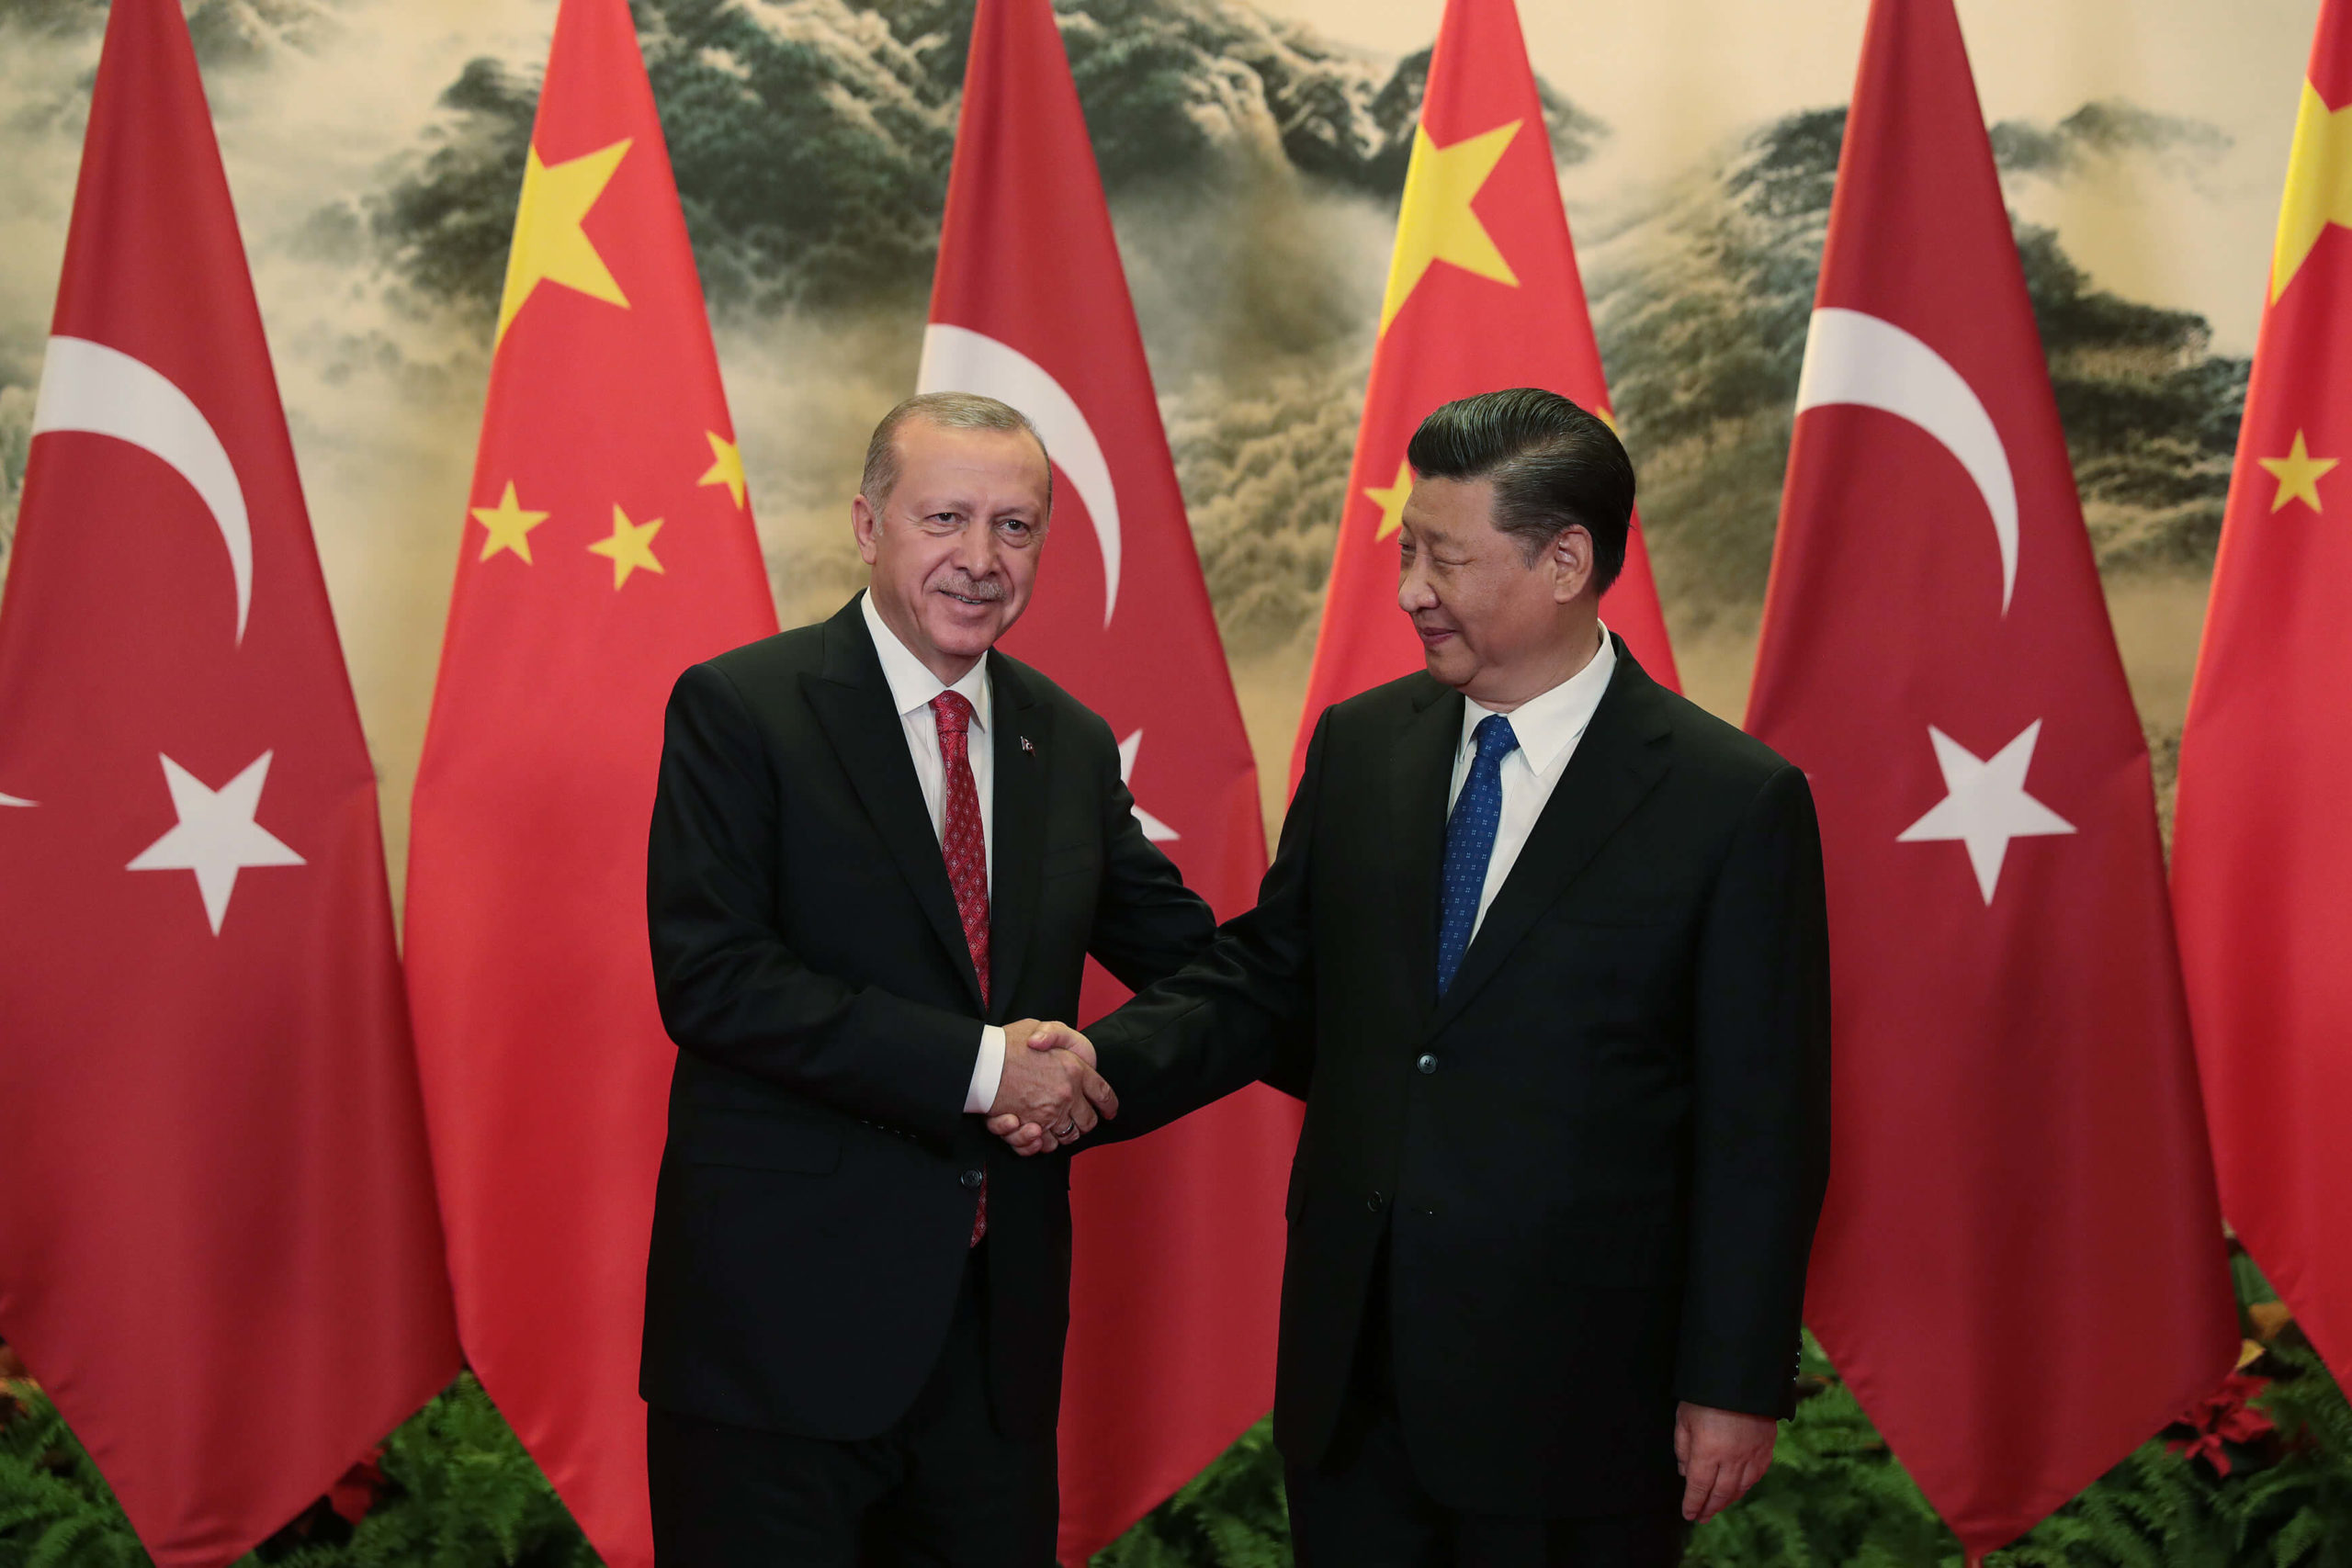 Upgrading The Traditional Dossier of The Turco-Chinese Relations: What Steps Now?